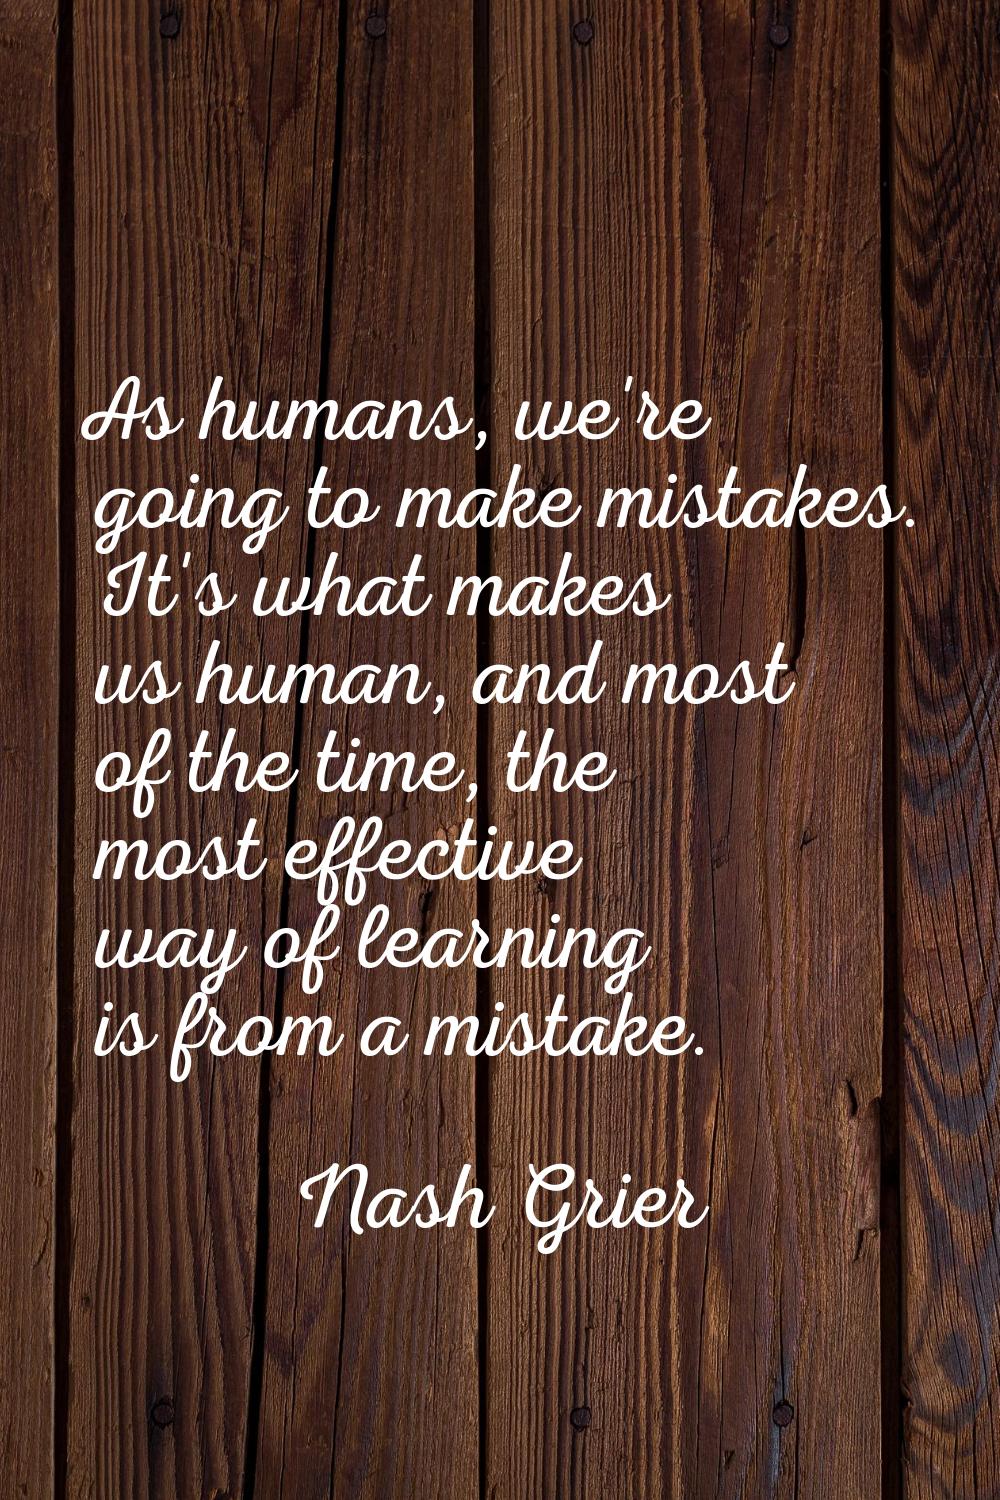 As humans, we're going to make mistakes. It's what makes us human, and most of the time, the most e